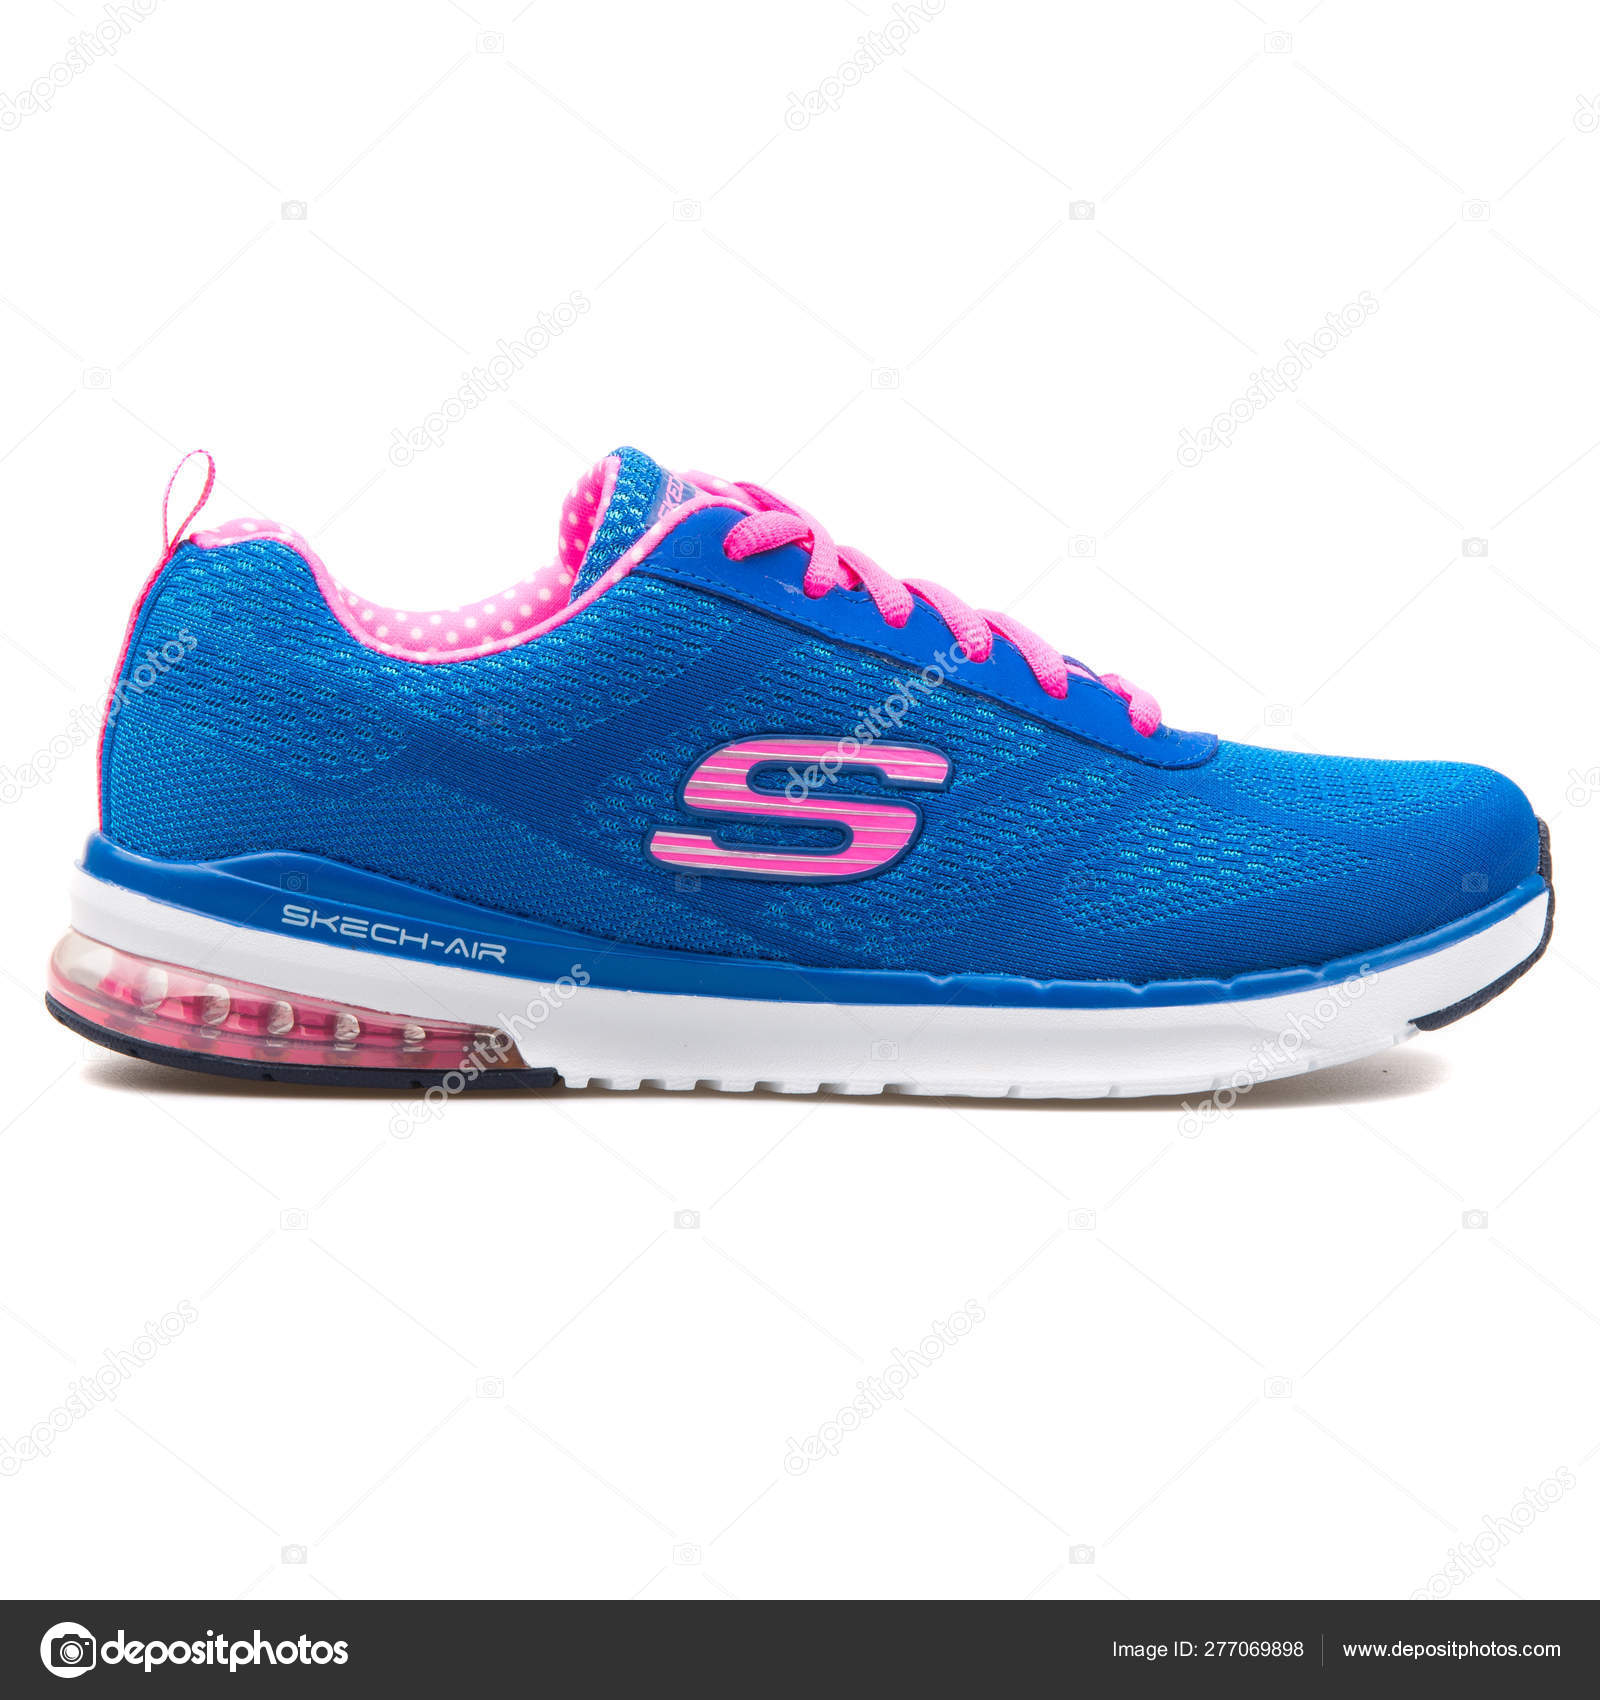 Skechers Skech Air Infinity blue and pink sneaker – Stock Editorial Photo ©  xMarshallfilms #277069898